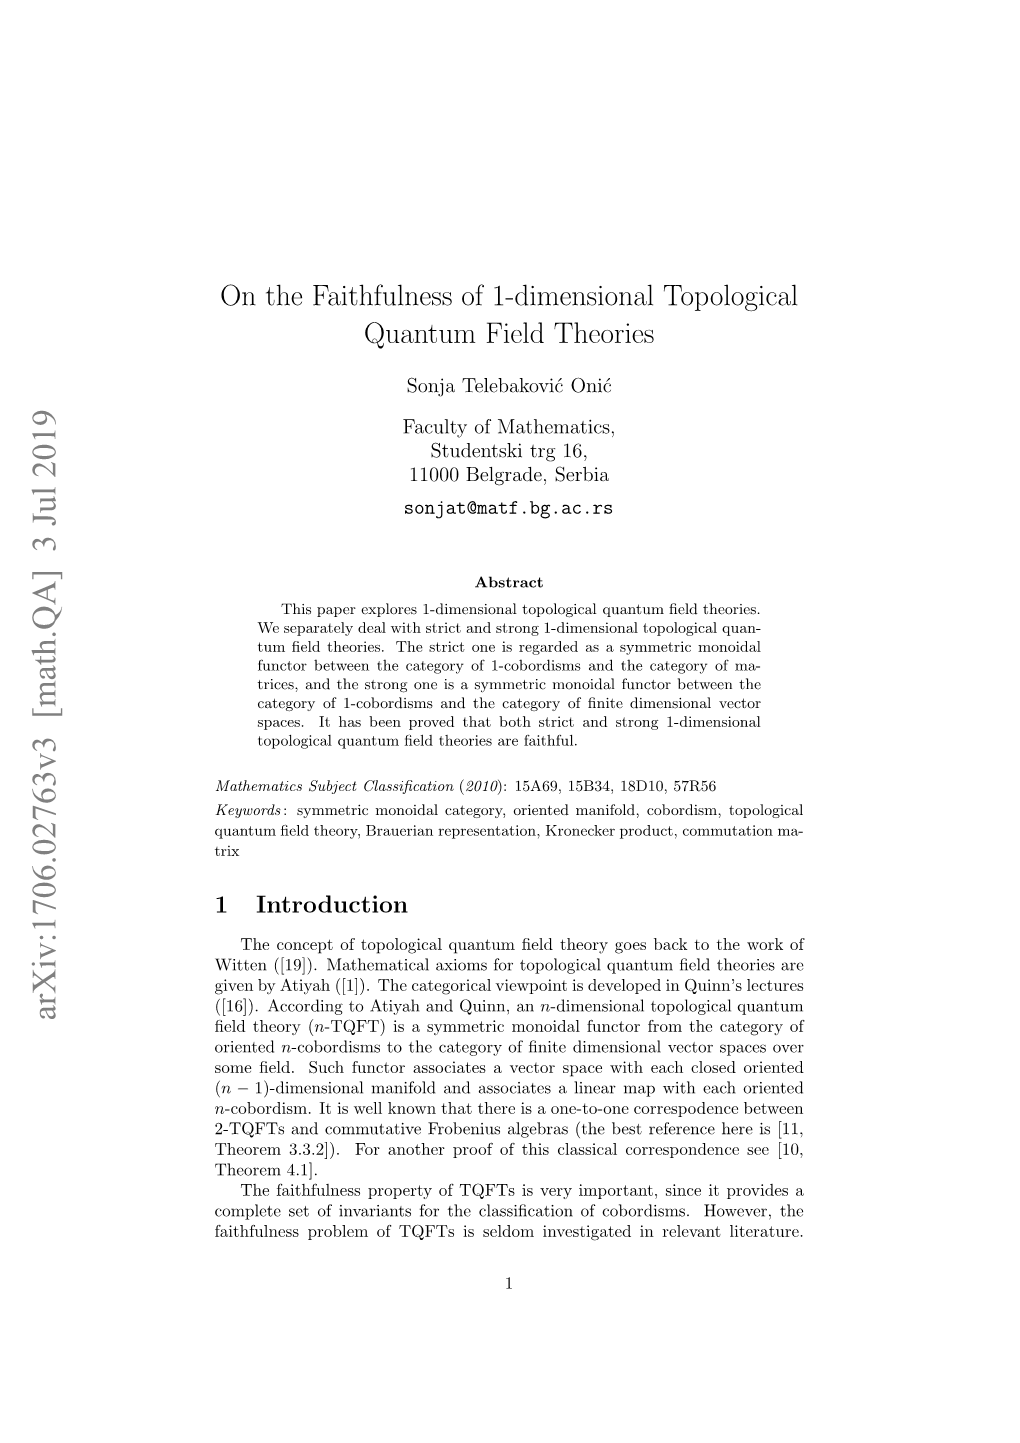 On the Faithfulness of 1-Dimensional Topological Quantum Field Theories